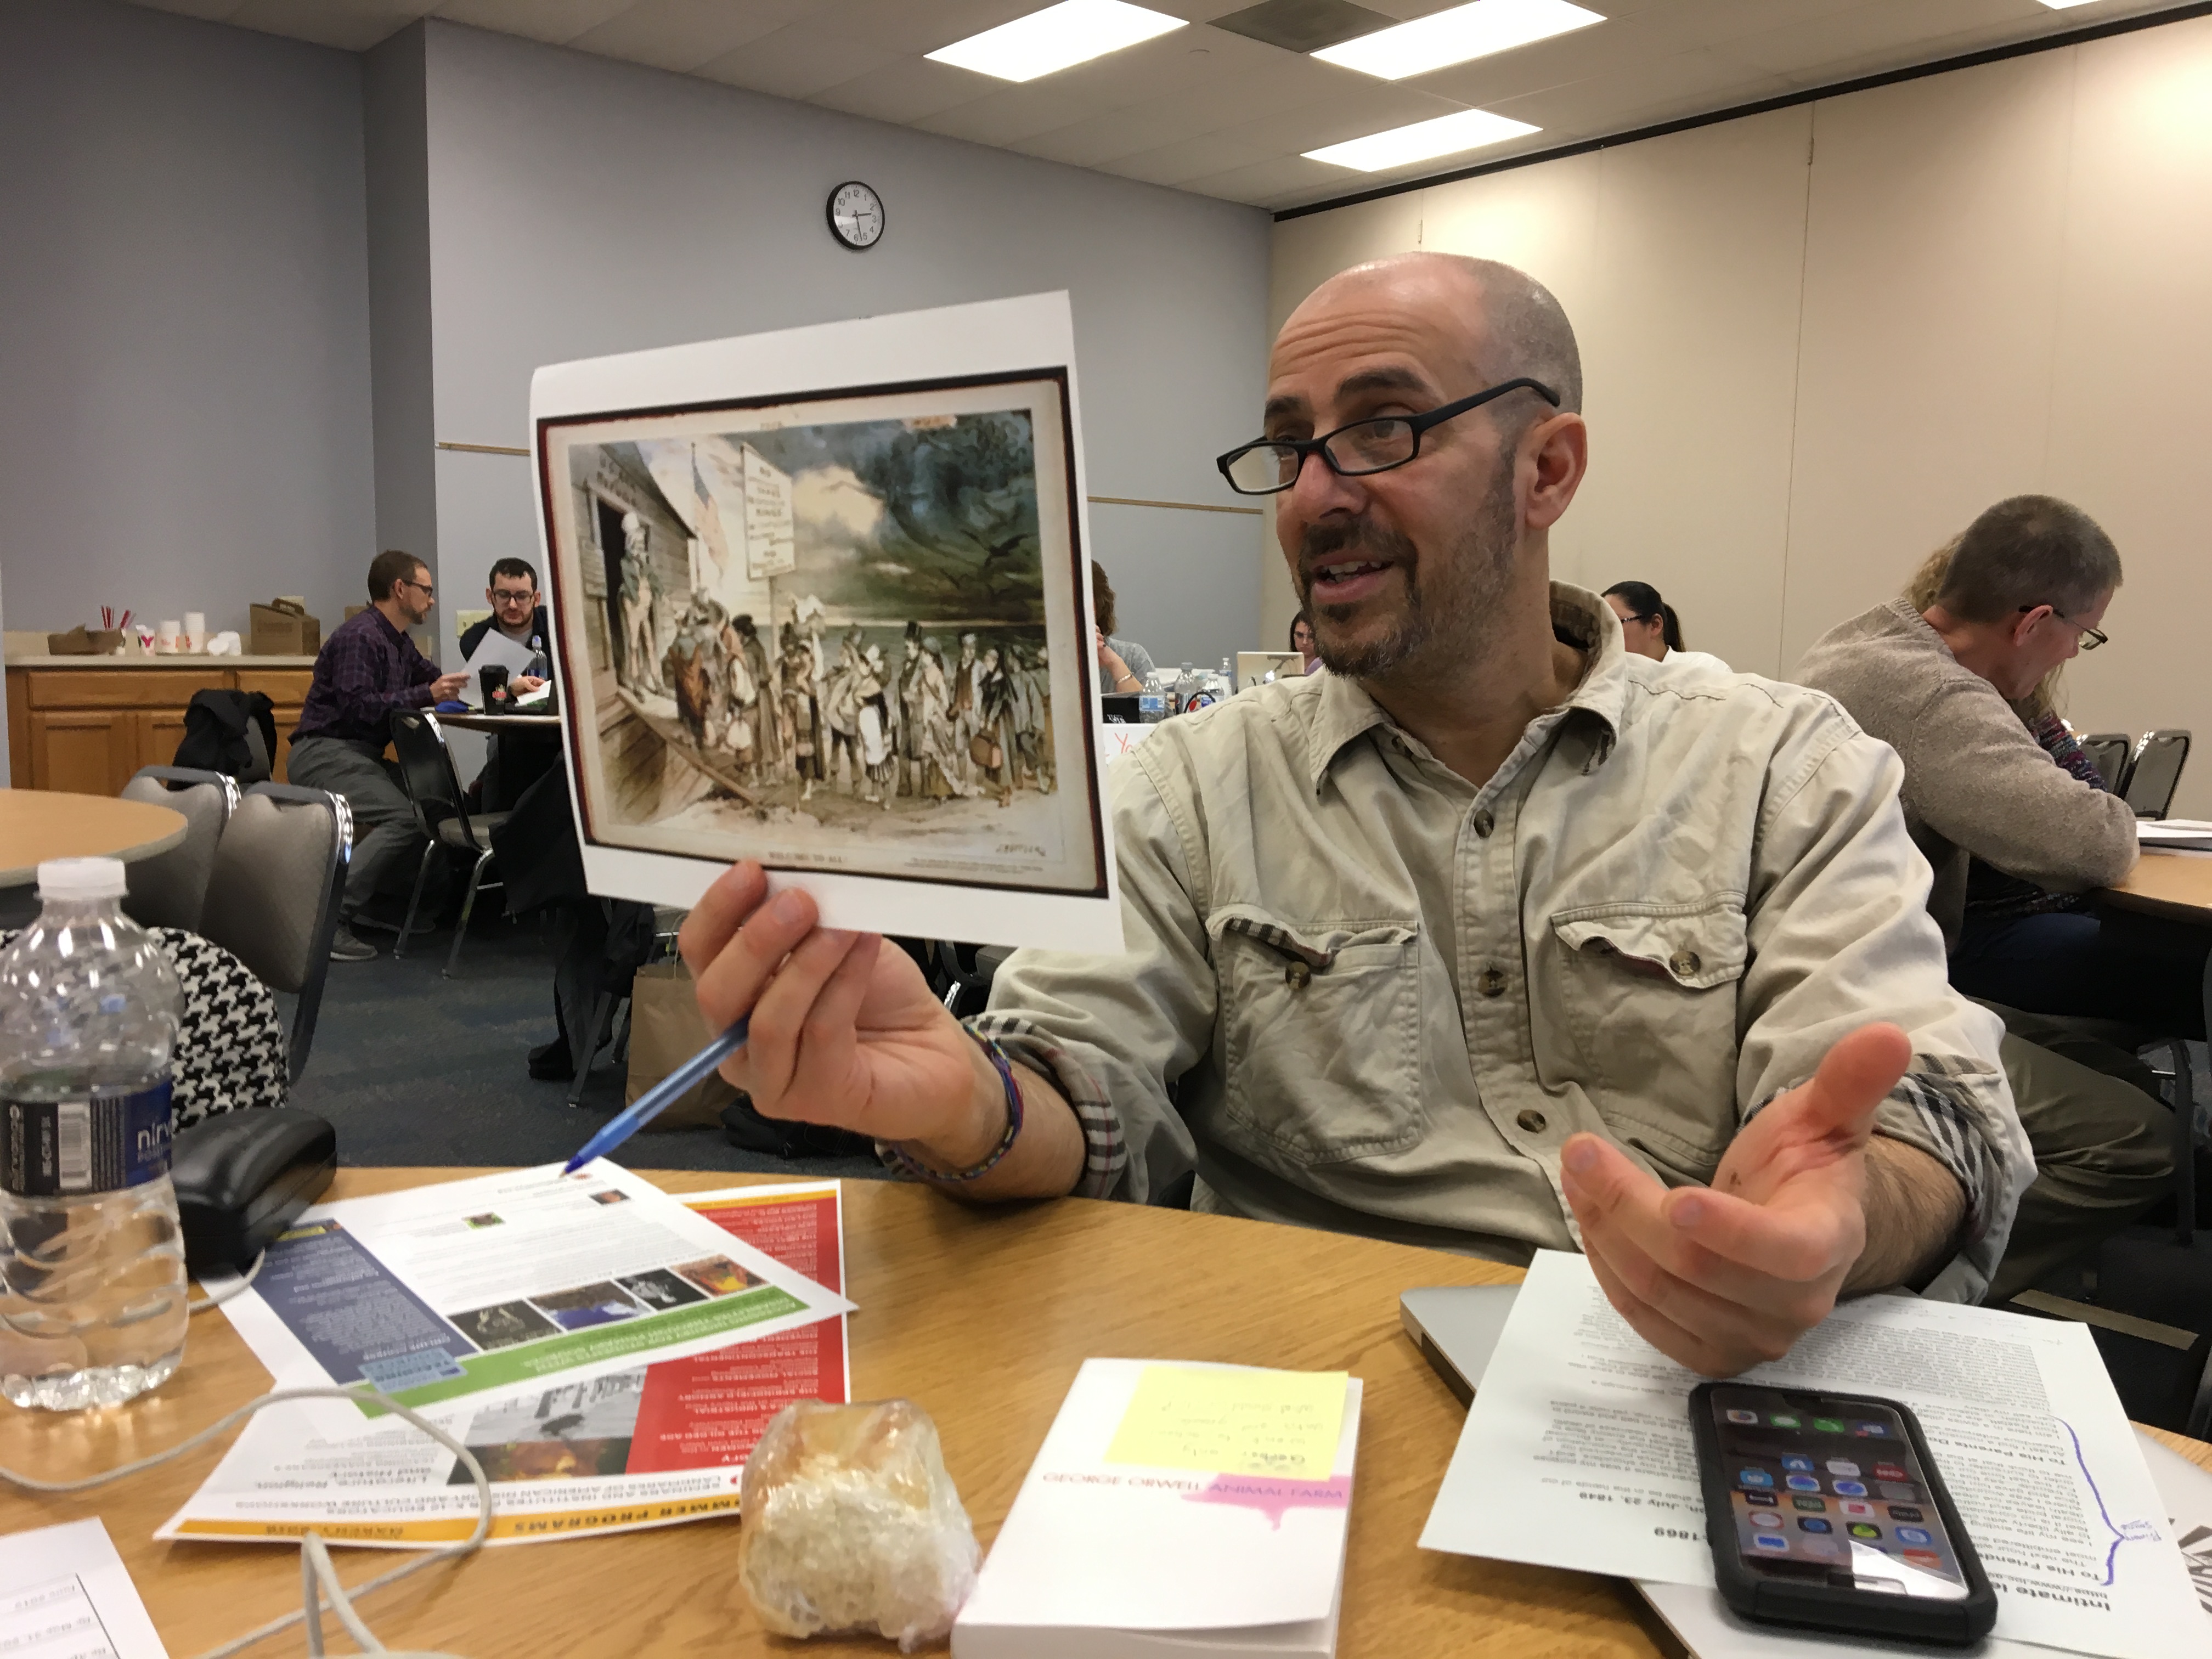 Man holds up a color print of an 19th c. cartoon as he gestures with his free hand.